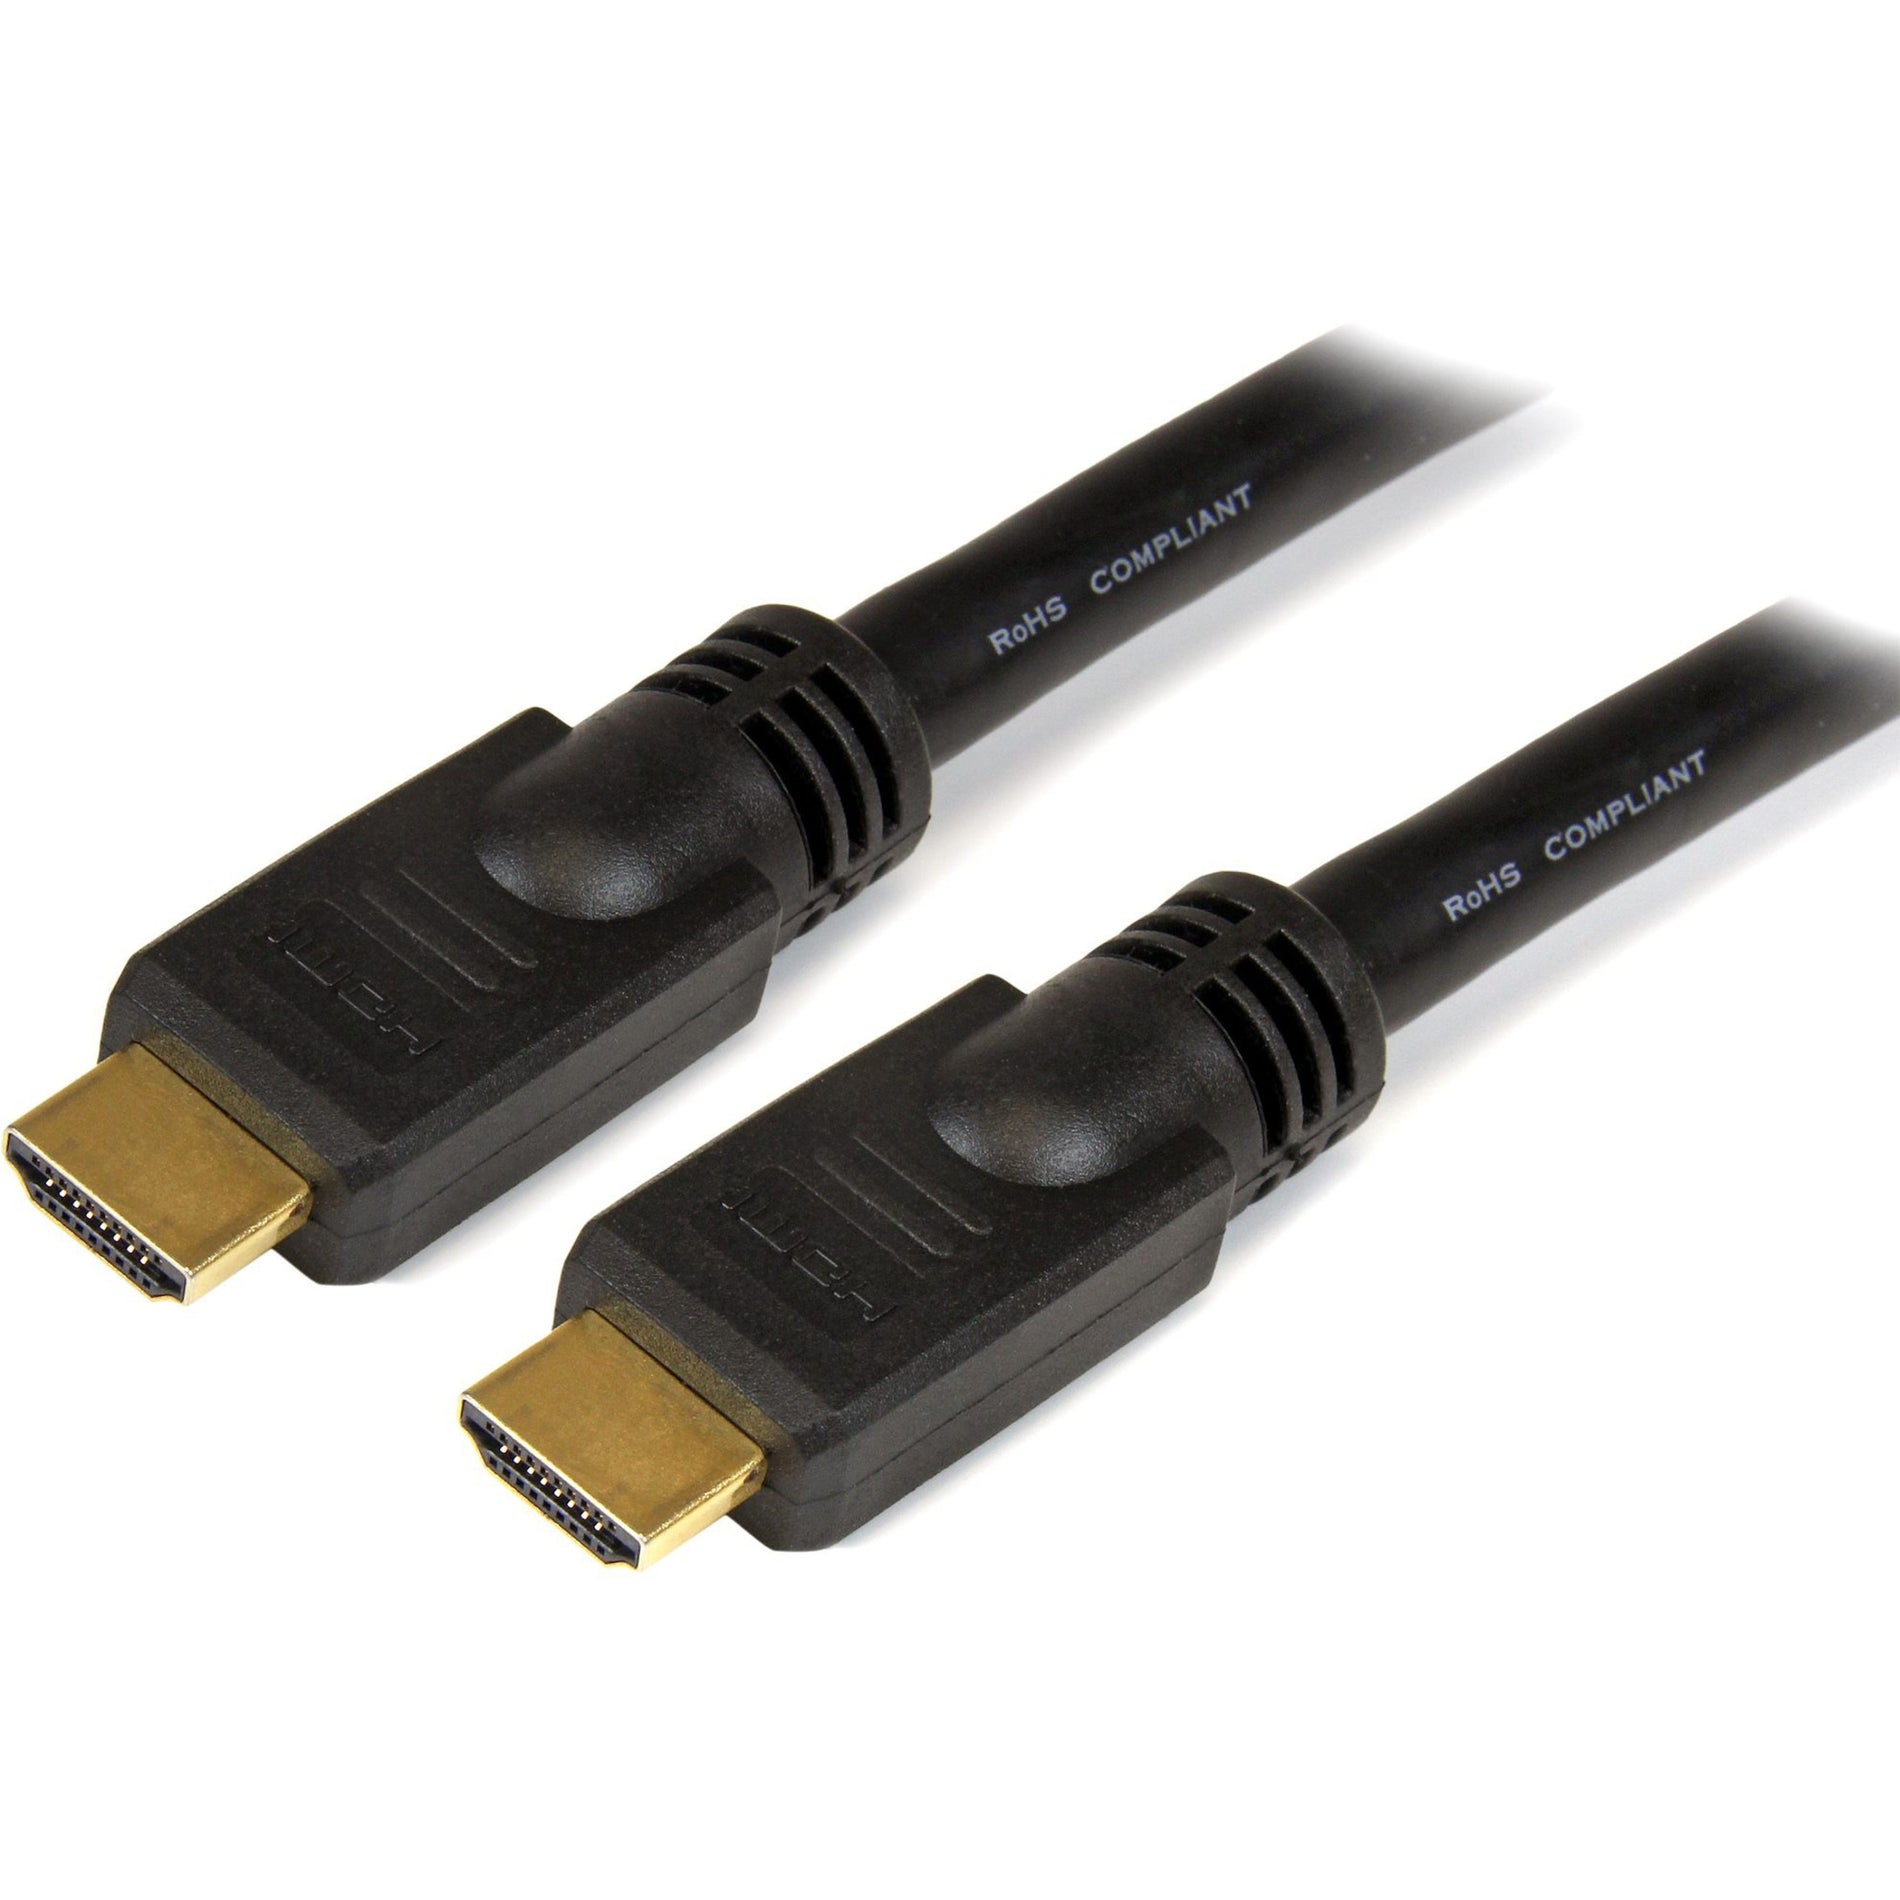 StarTech.com HDMM7M 7m High Speed HDMI Cable - Ultra HD 4k x 2k HDMI Cable, Corrosion Resistant, Strain Relief, Molded, Gold Plated Connectors, Black